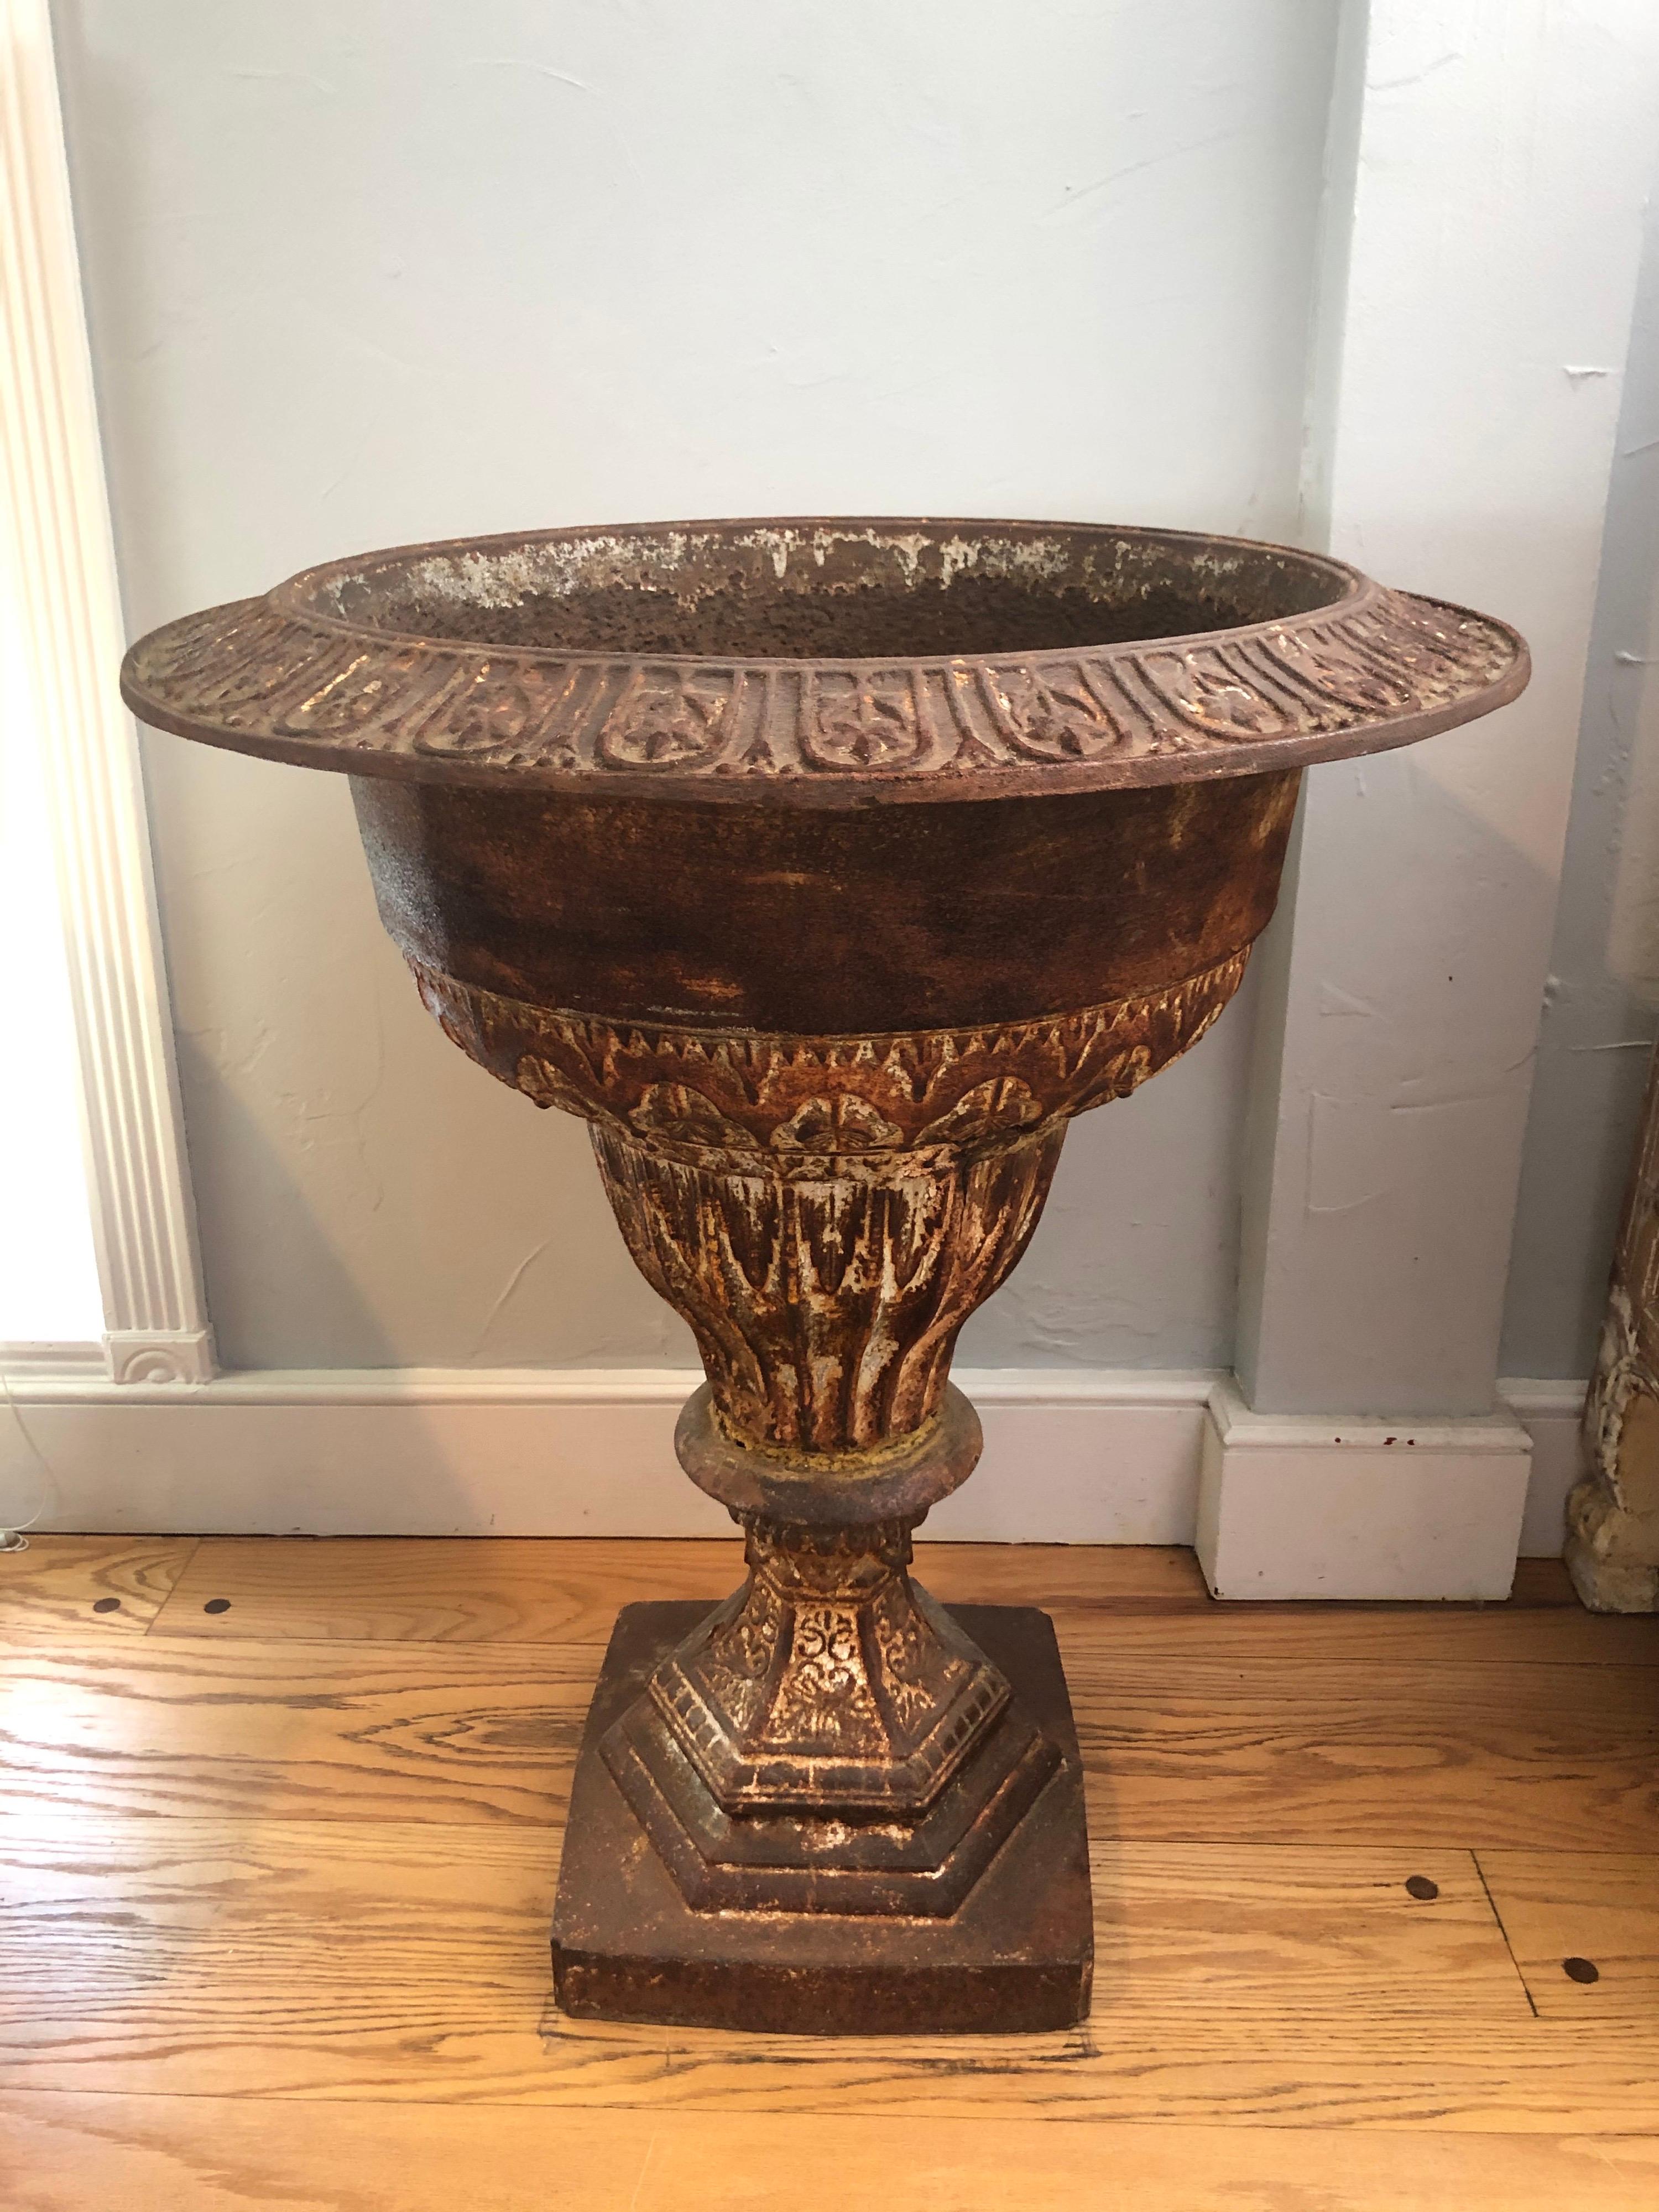 Late 19th century garden urn. This beautiful piece is most likely produced by J. W. Fiske and Company although a signature cannot be found. This incredible detailed Victorian piece can be used in or outdoors. The date is stamped on the side and we